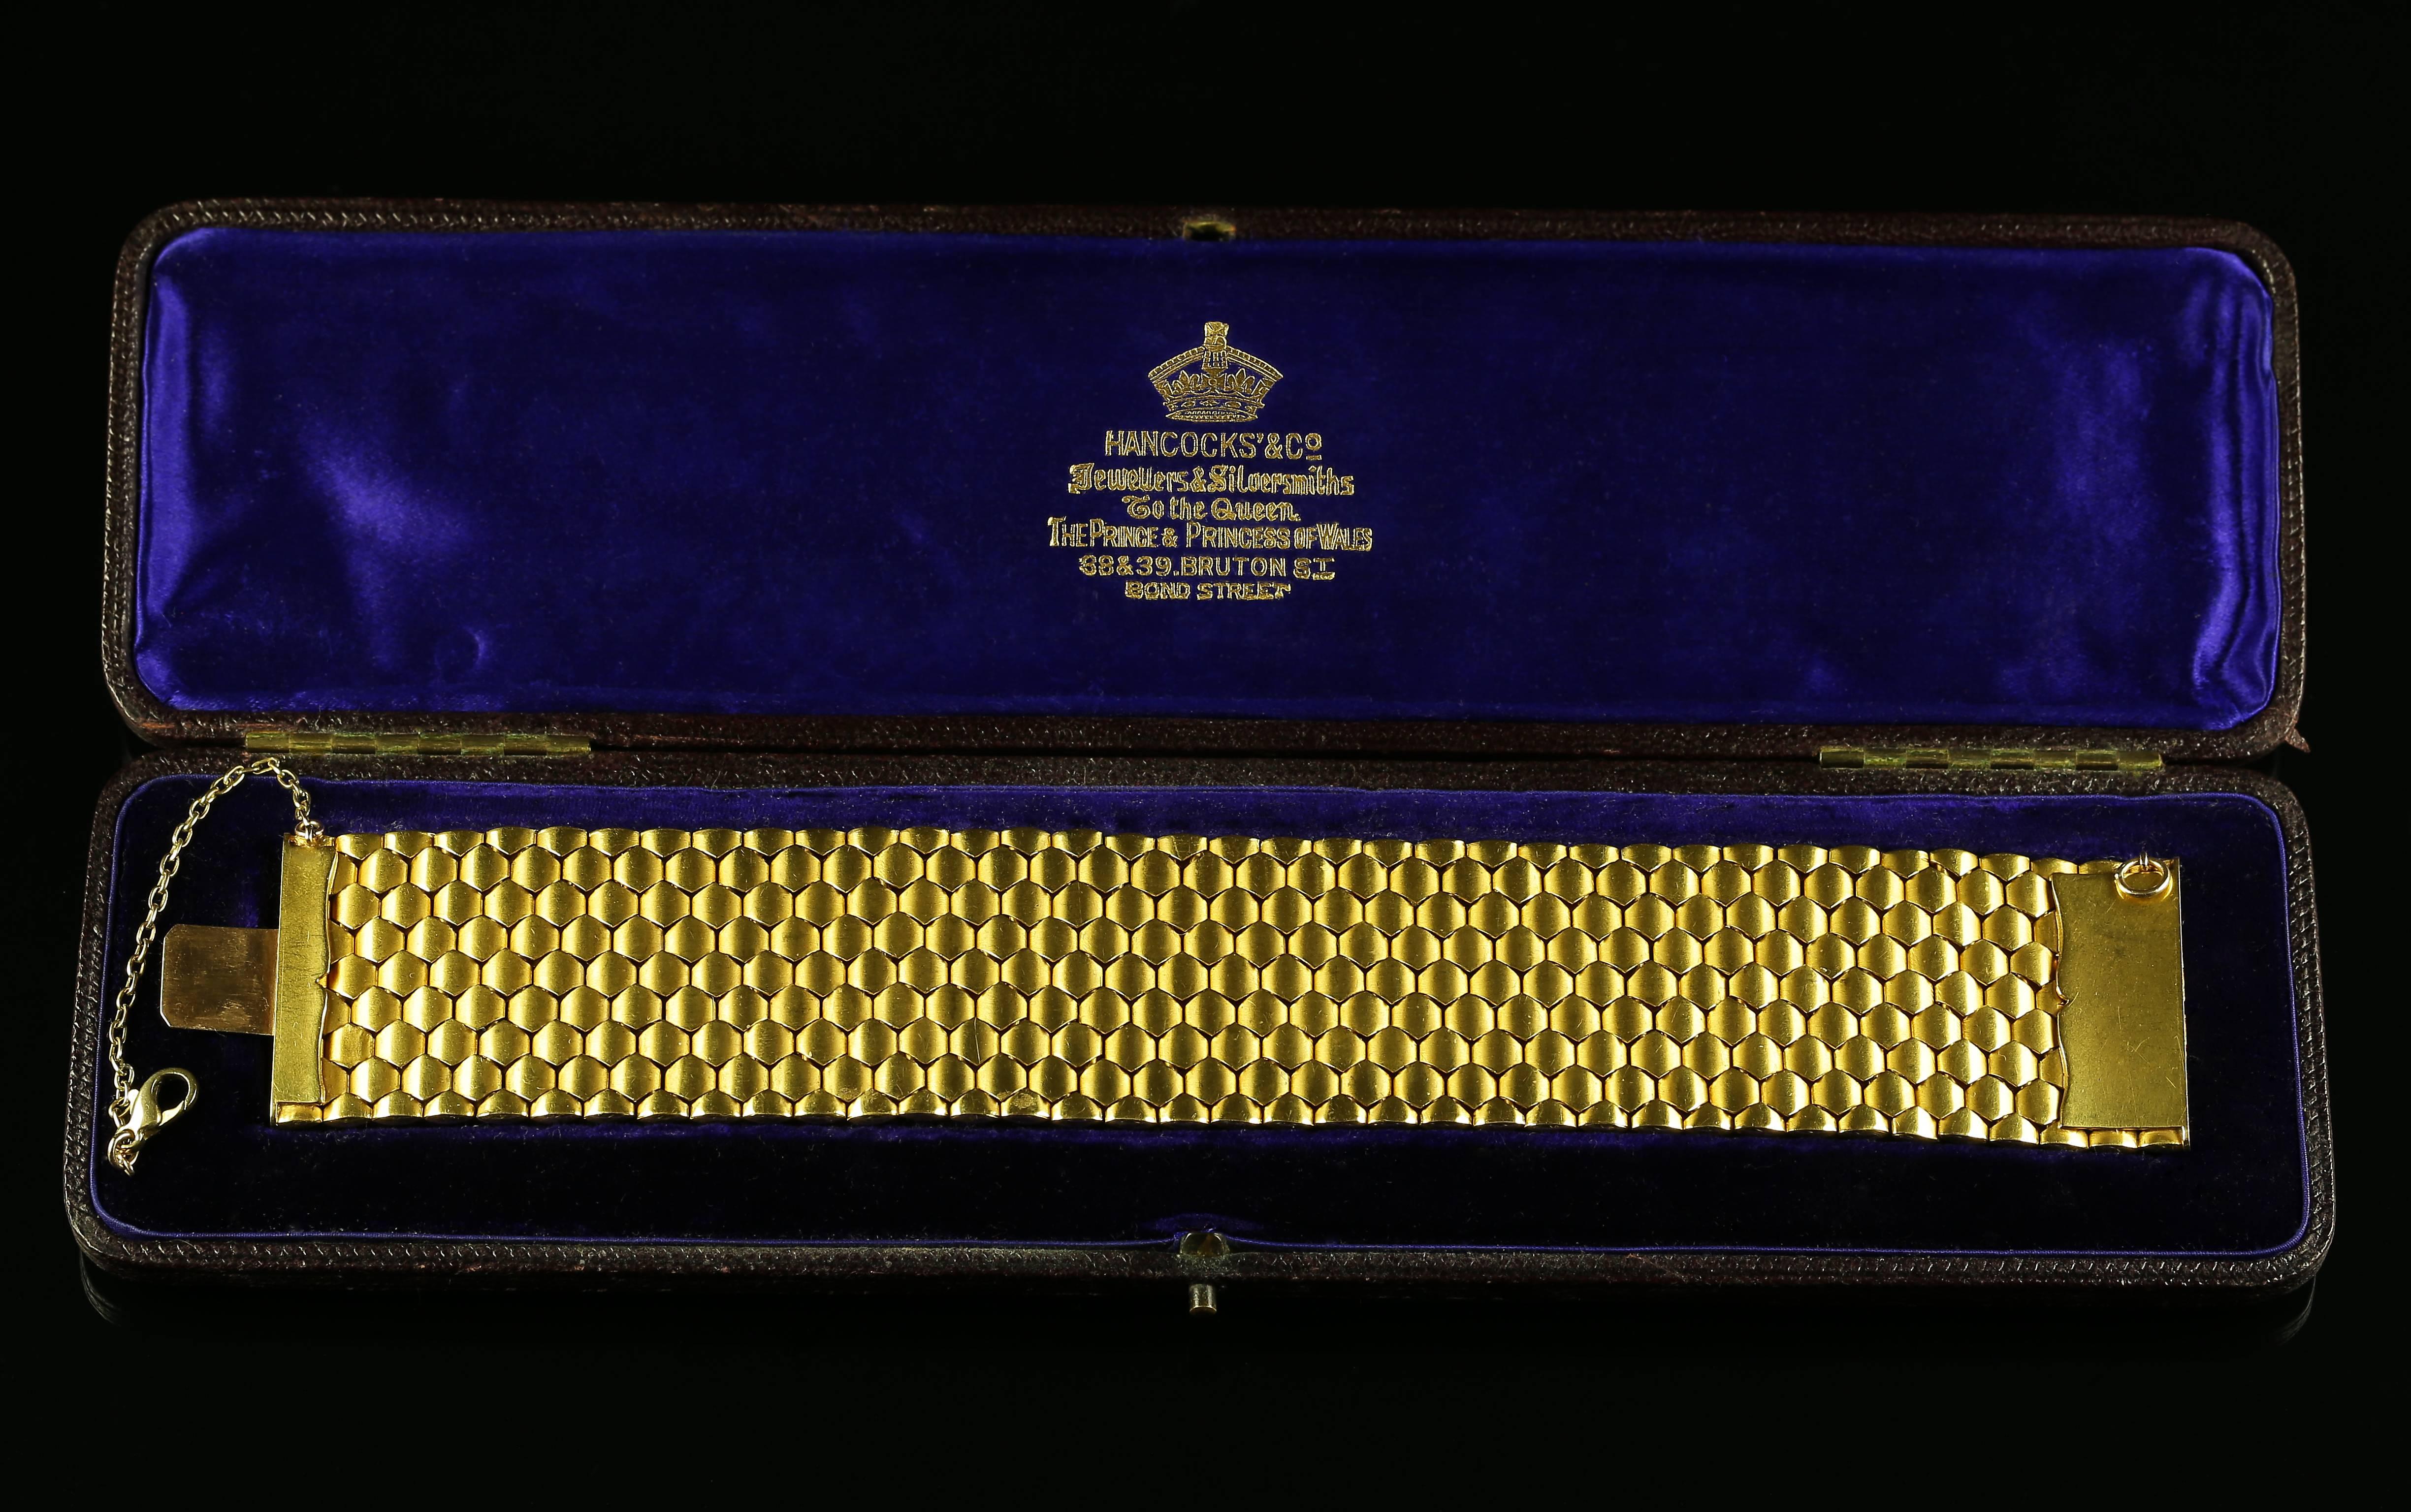 This magnificent Antique bracelet is solid 18ct gold in its original box.  

The bracelet comprises of exquisite gold workmanship from the jewellers Hancocks 

Hancock's is a Jeweller and Silver smith to the Queen, also The Prince and Princess of